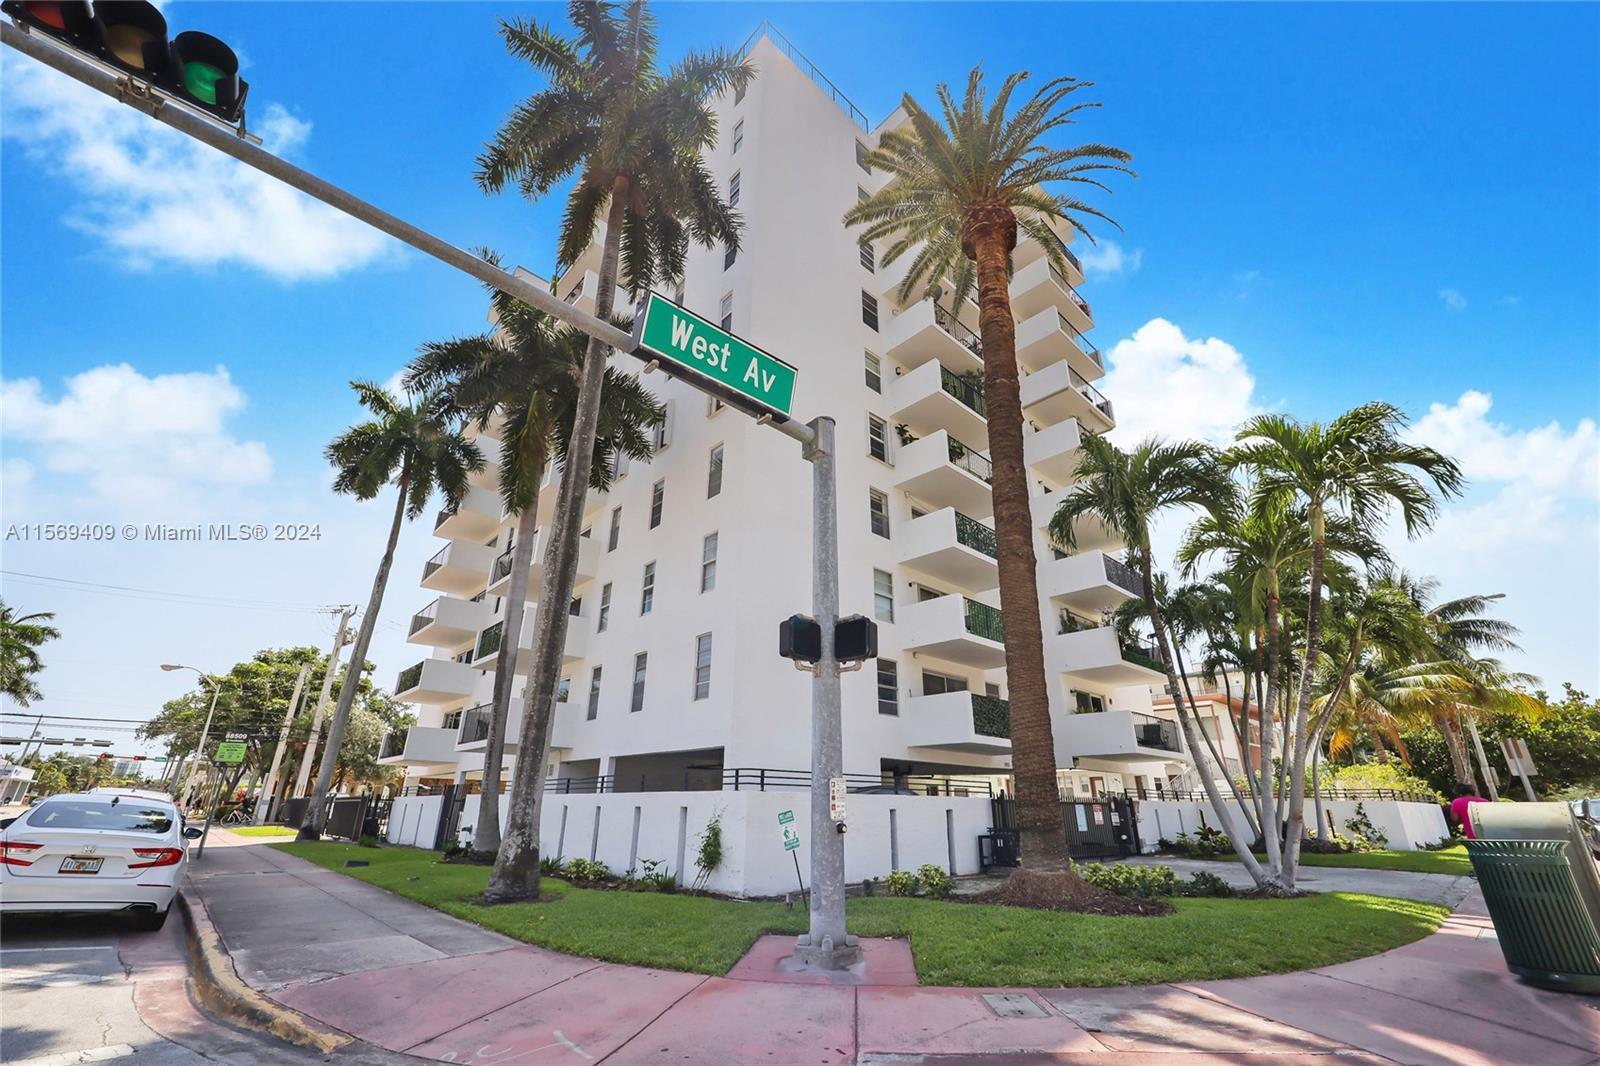 Live in the heart of South Beach, West Avenue neighborhood, boutique, and quiet building Bayshore Te